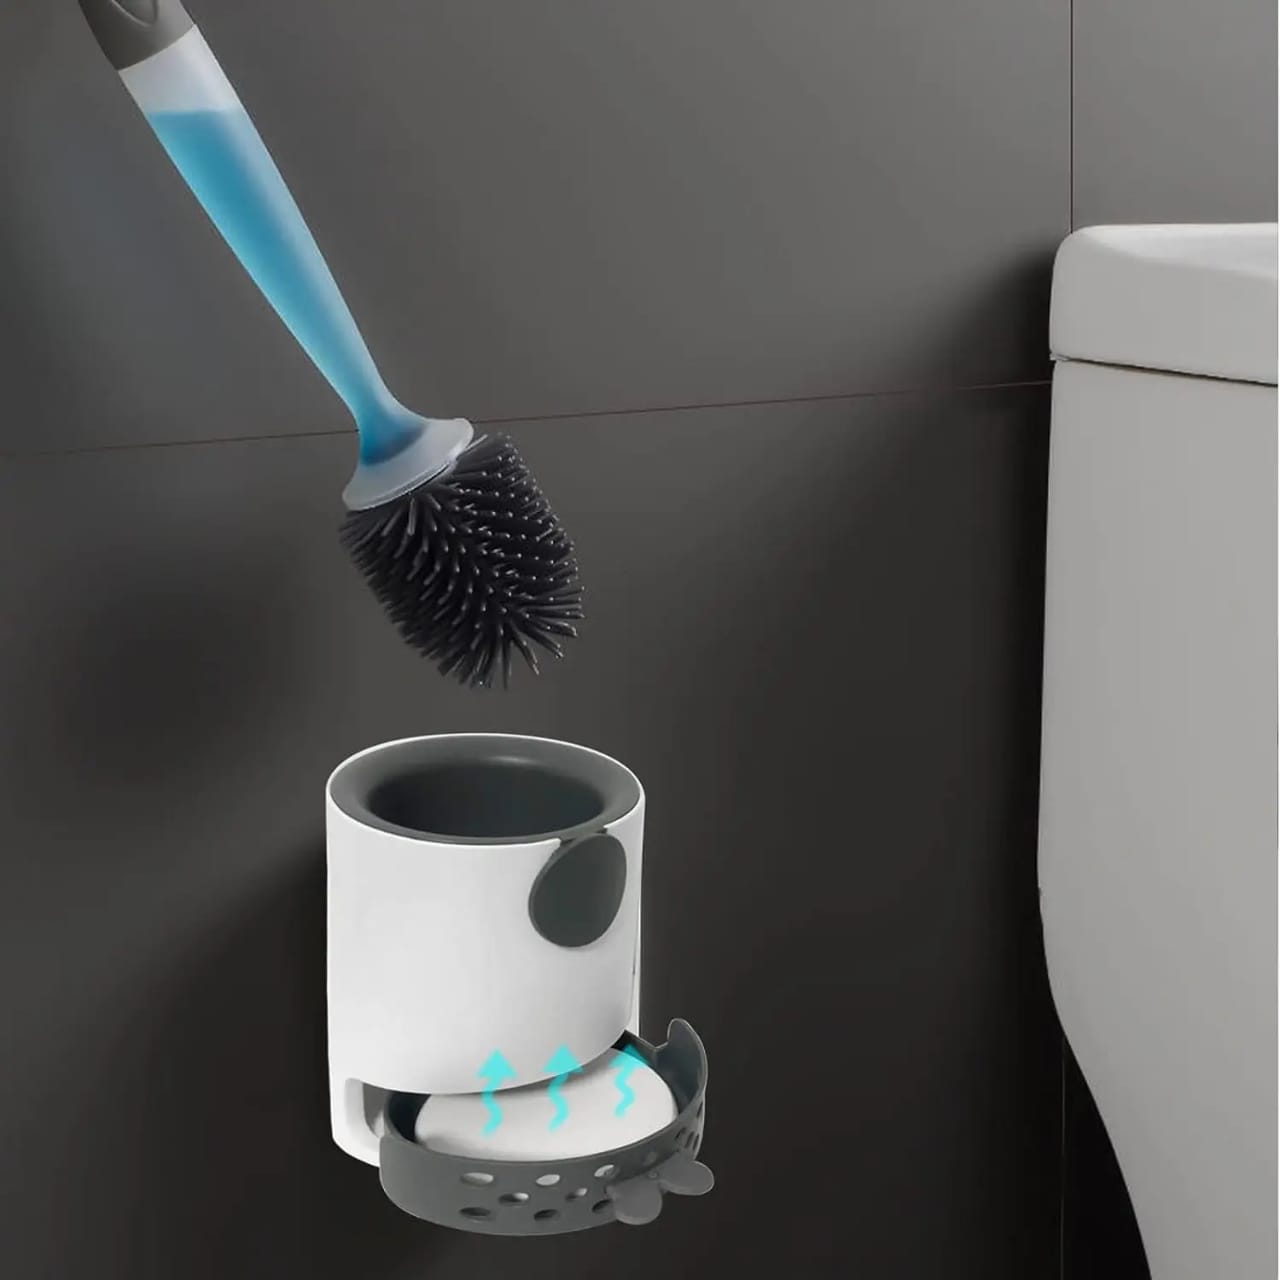 Refillable Toilet Cleaning Brush is Attached on the Wall Of Toilet.